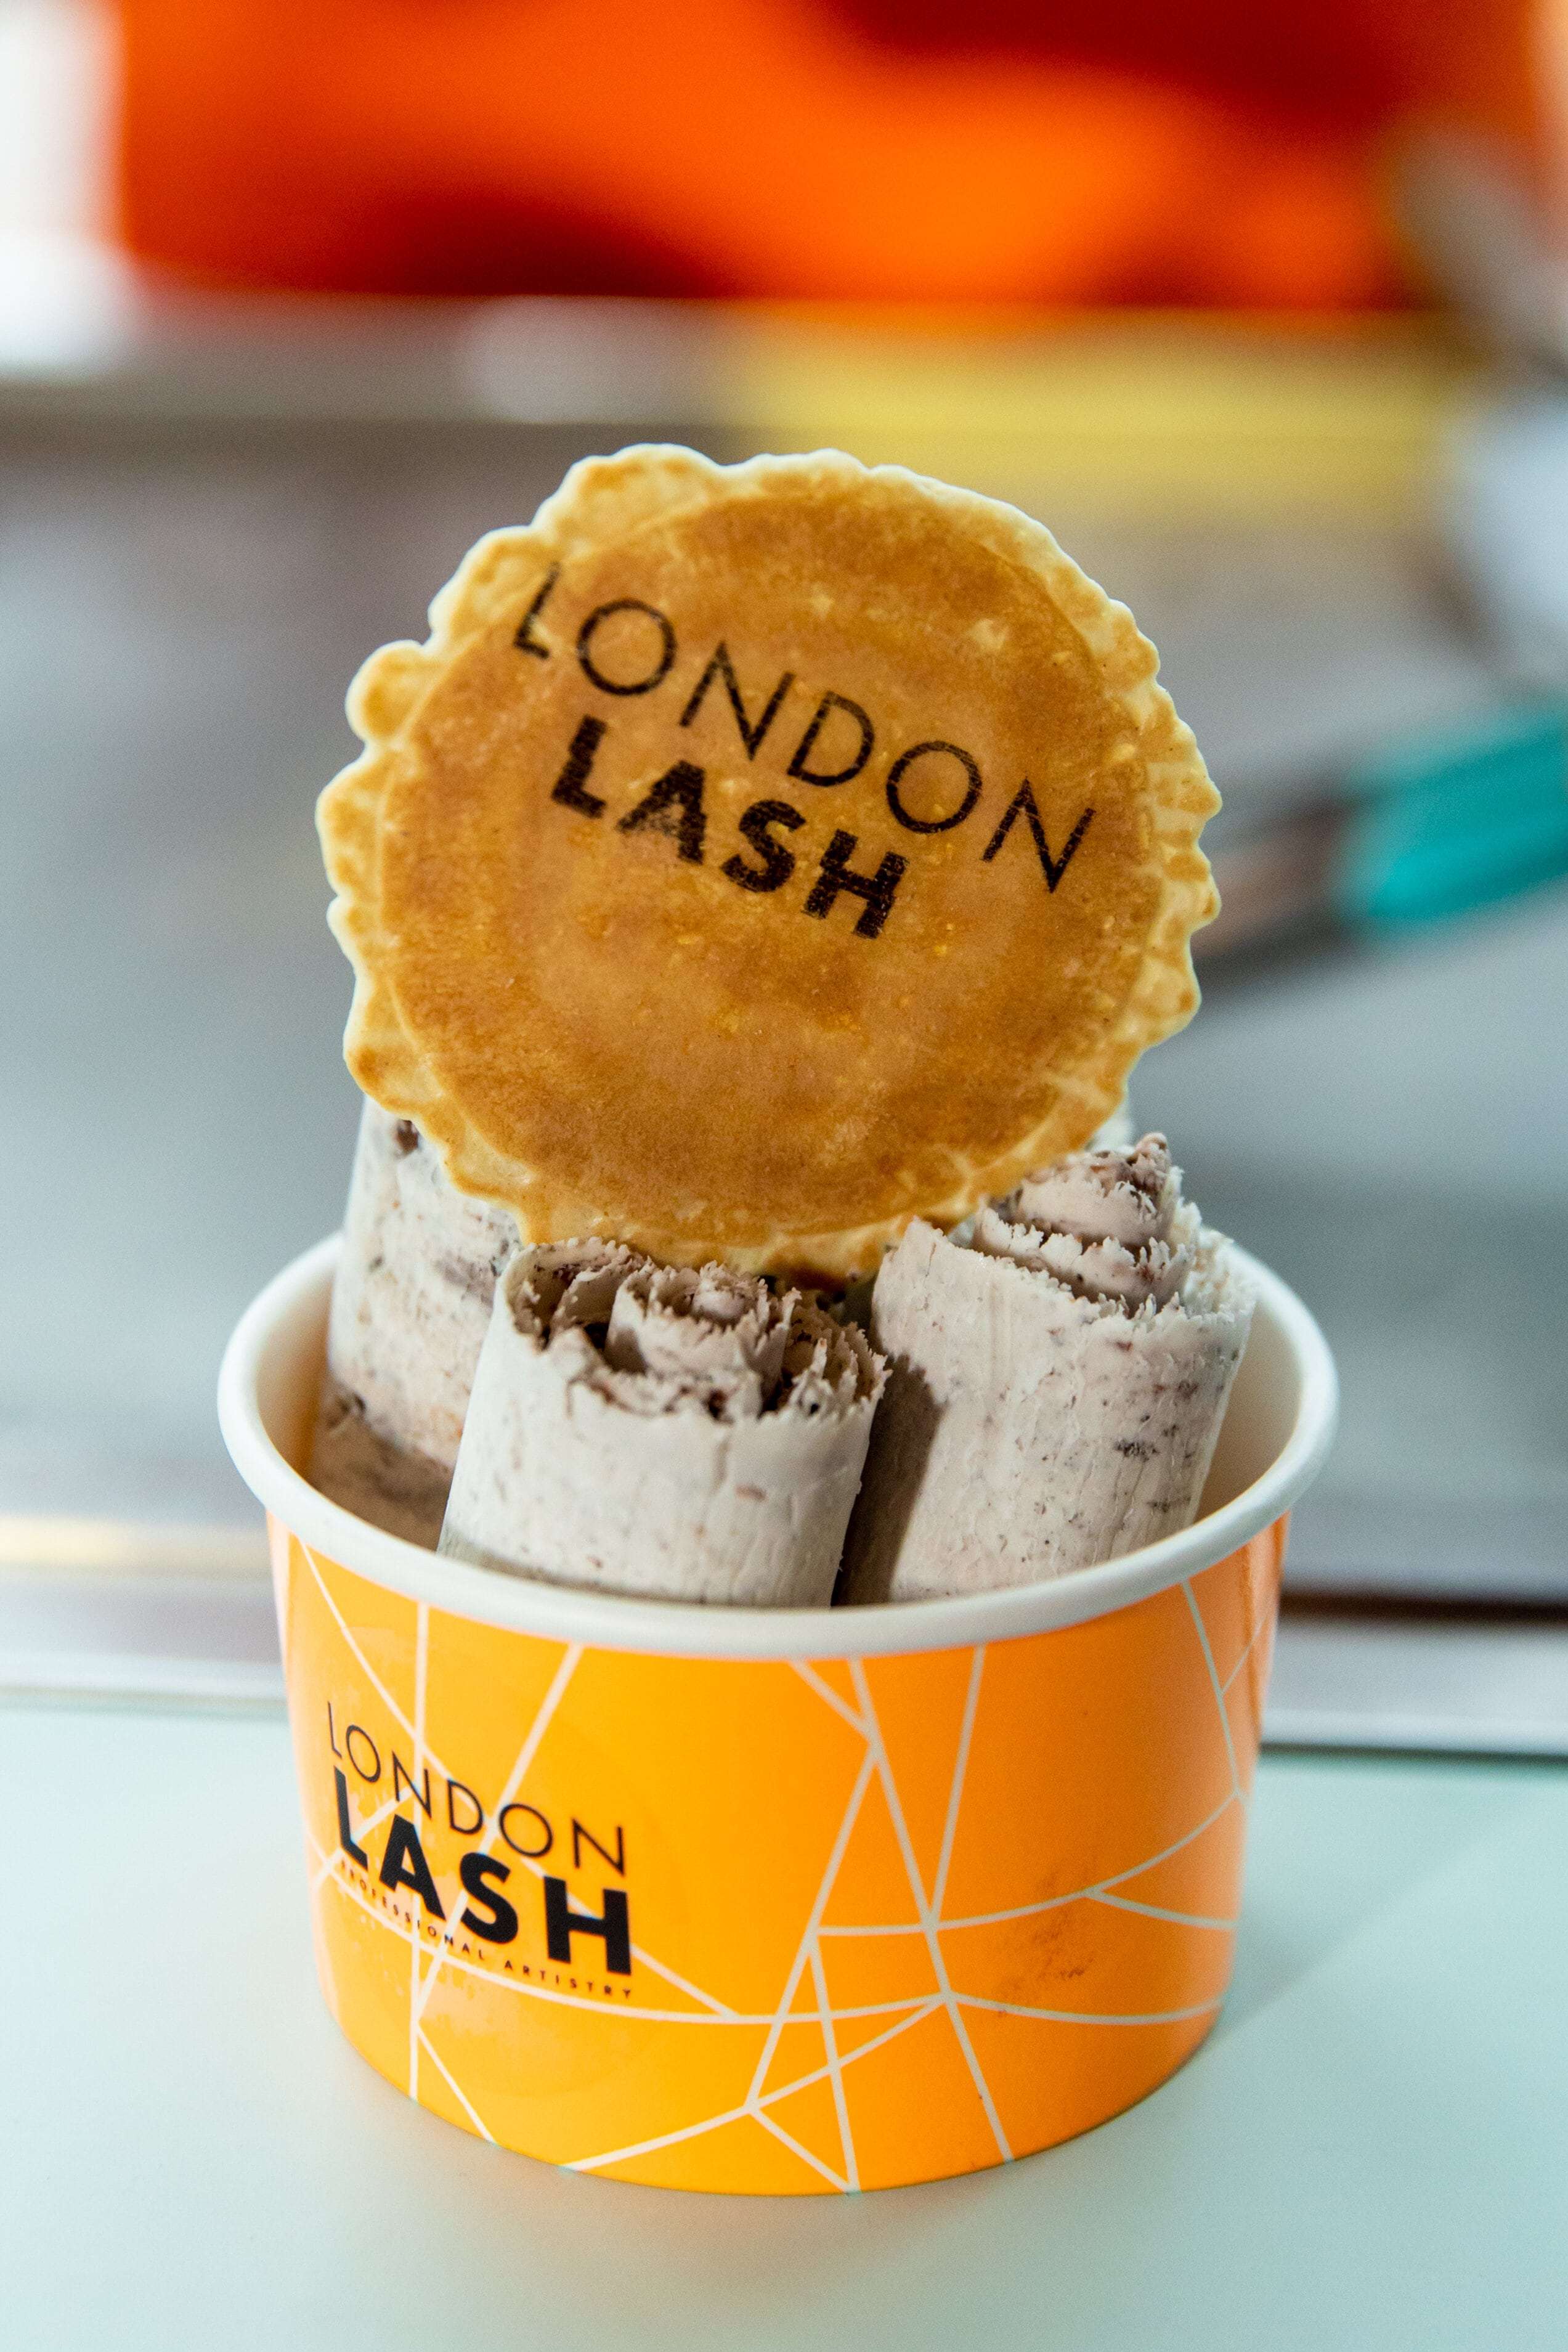 Oreo and nutella Rolled ice cream with London Lash branding